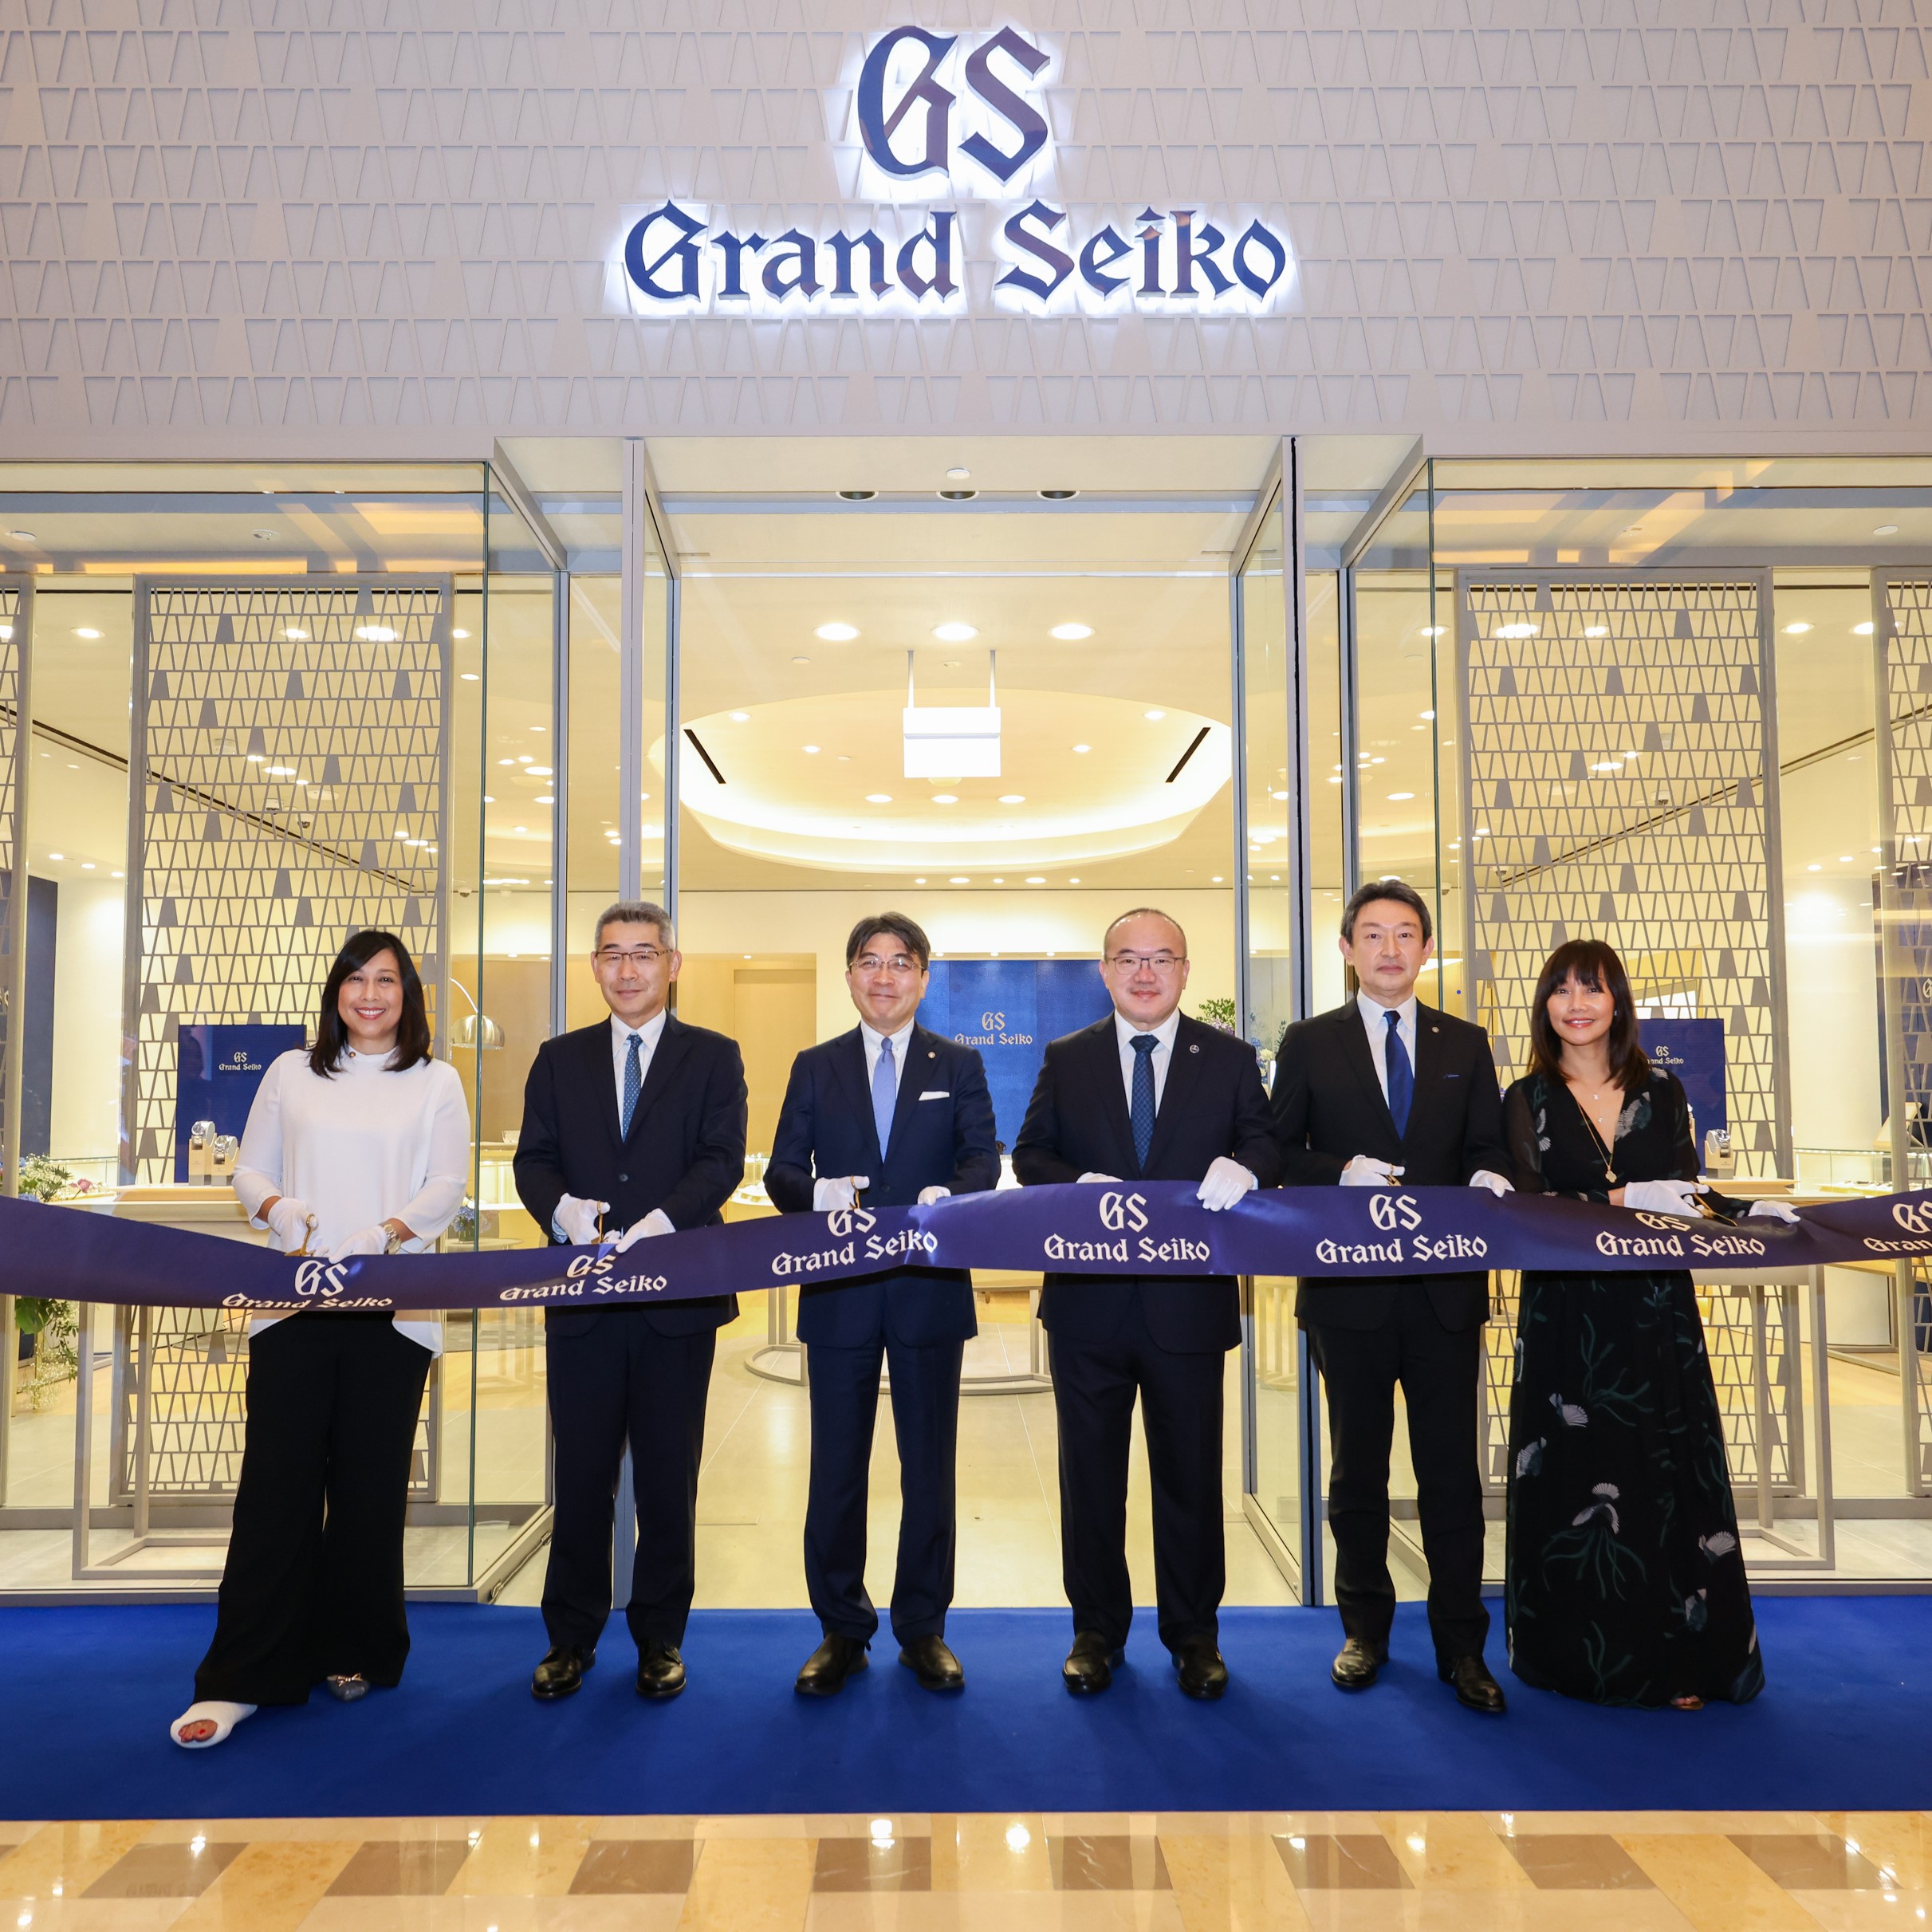 Grand Seiko Opens Its First Boutique in Singapore at Marina Bay Sands |  Morningstar